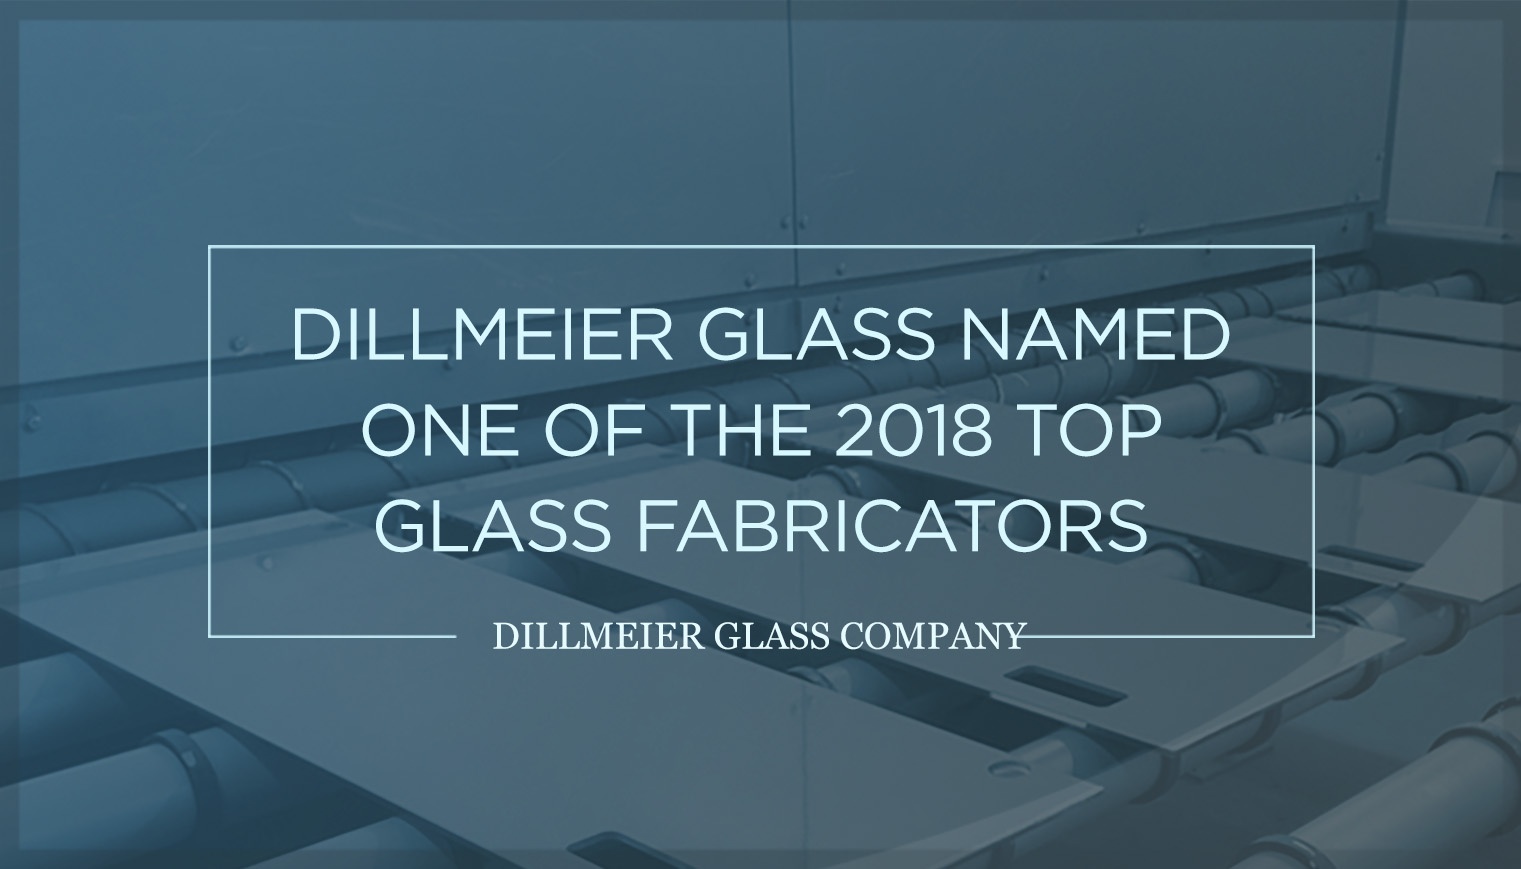 Dillmeier Glass Named One of the 2018 Top Glass Fabricators